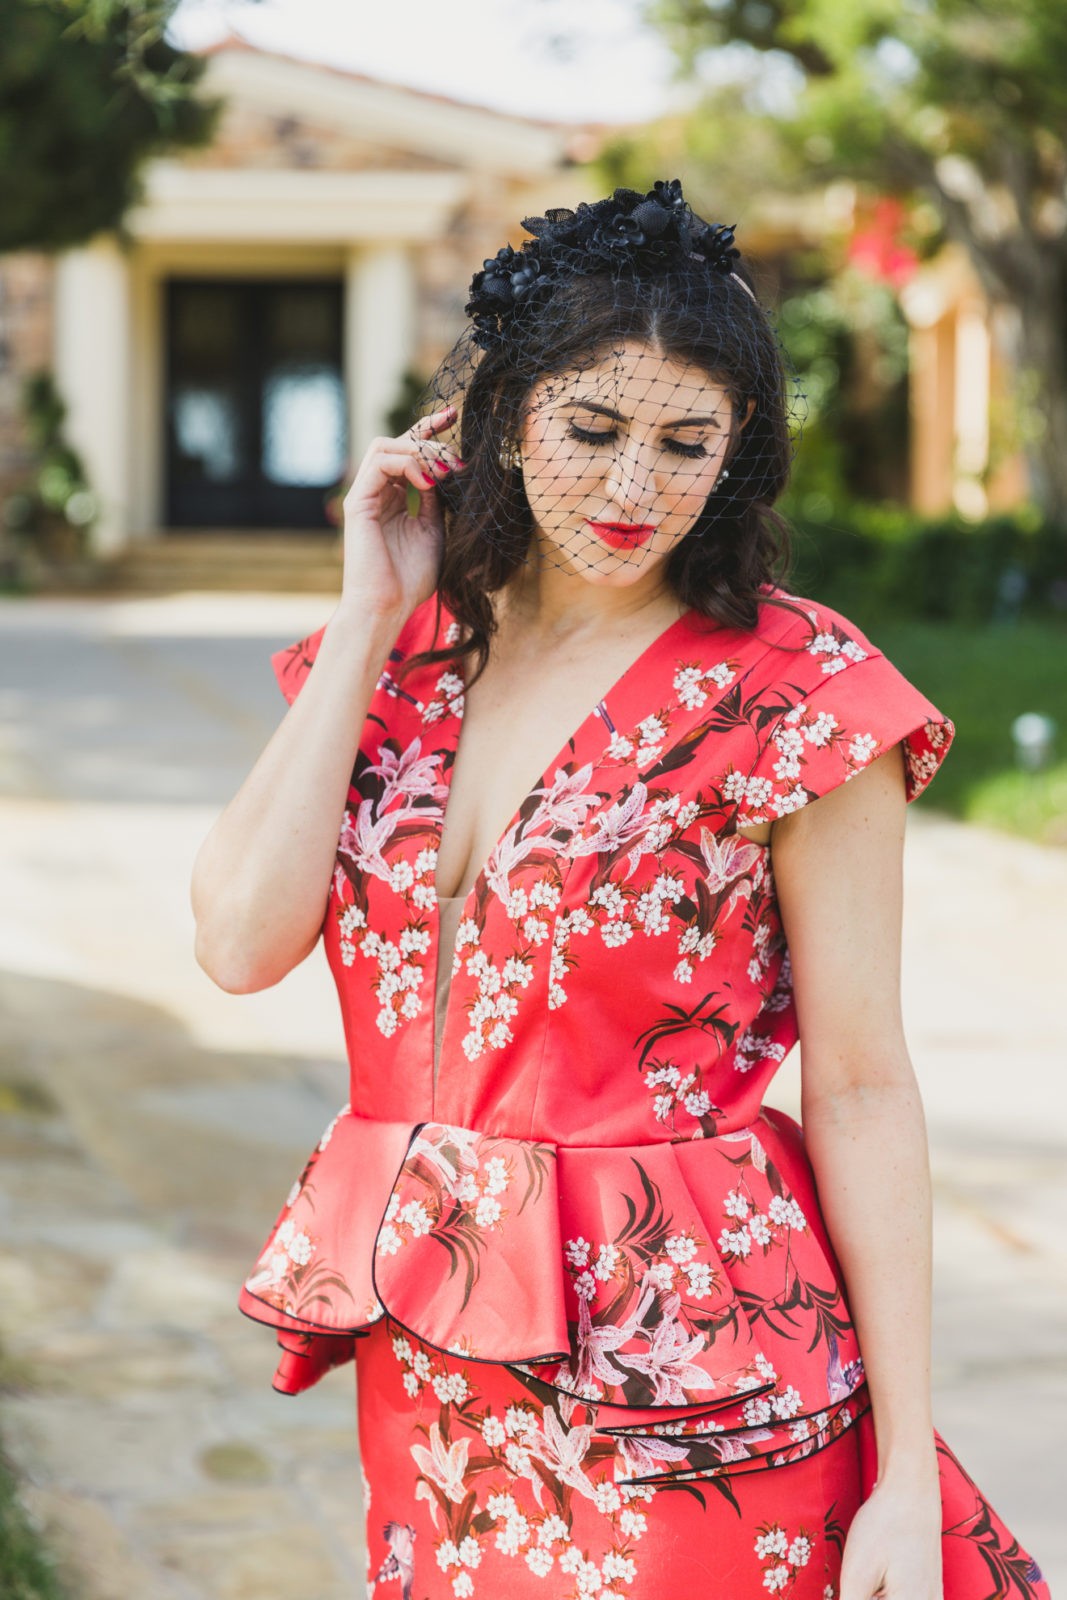 Johanna Ortiz Peplum Dress by Fashion Blogger Laura Lily, Red wedding guest dress ideas | Cute Headbands for Women by popular LA fashion blogger, Laura Lily: image of a woman wearing a black floral birdcage headband. 